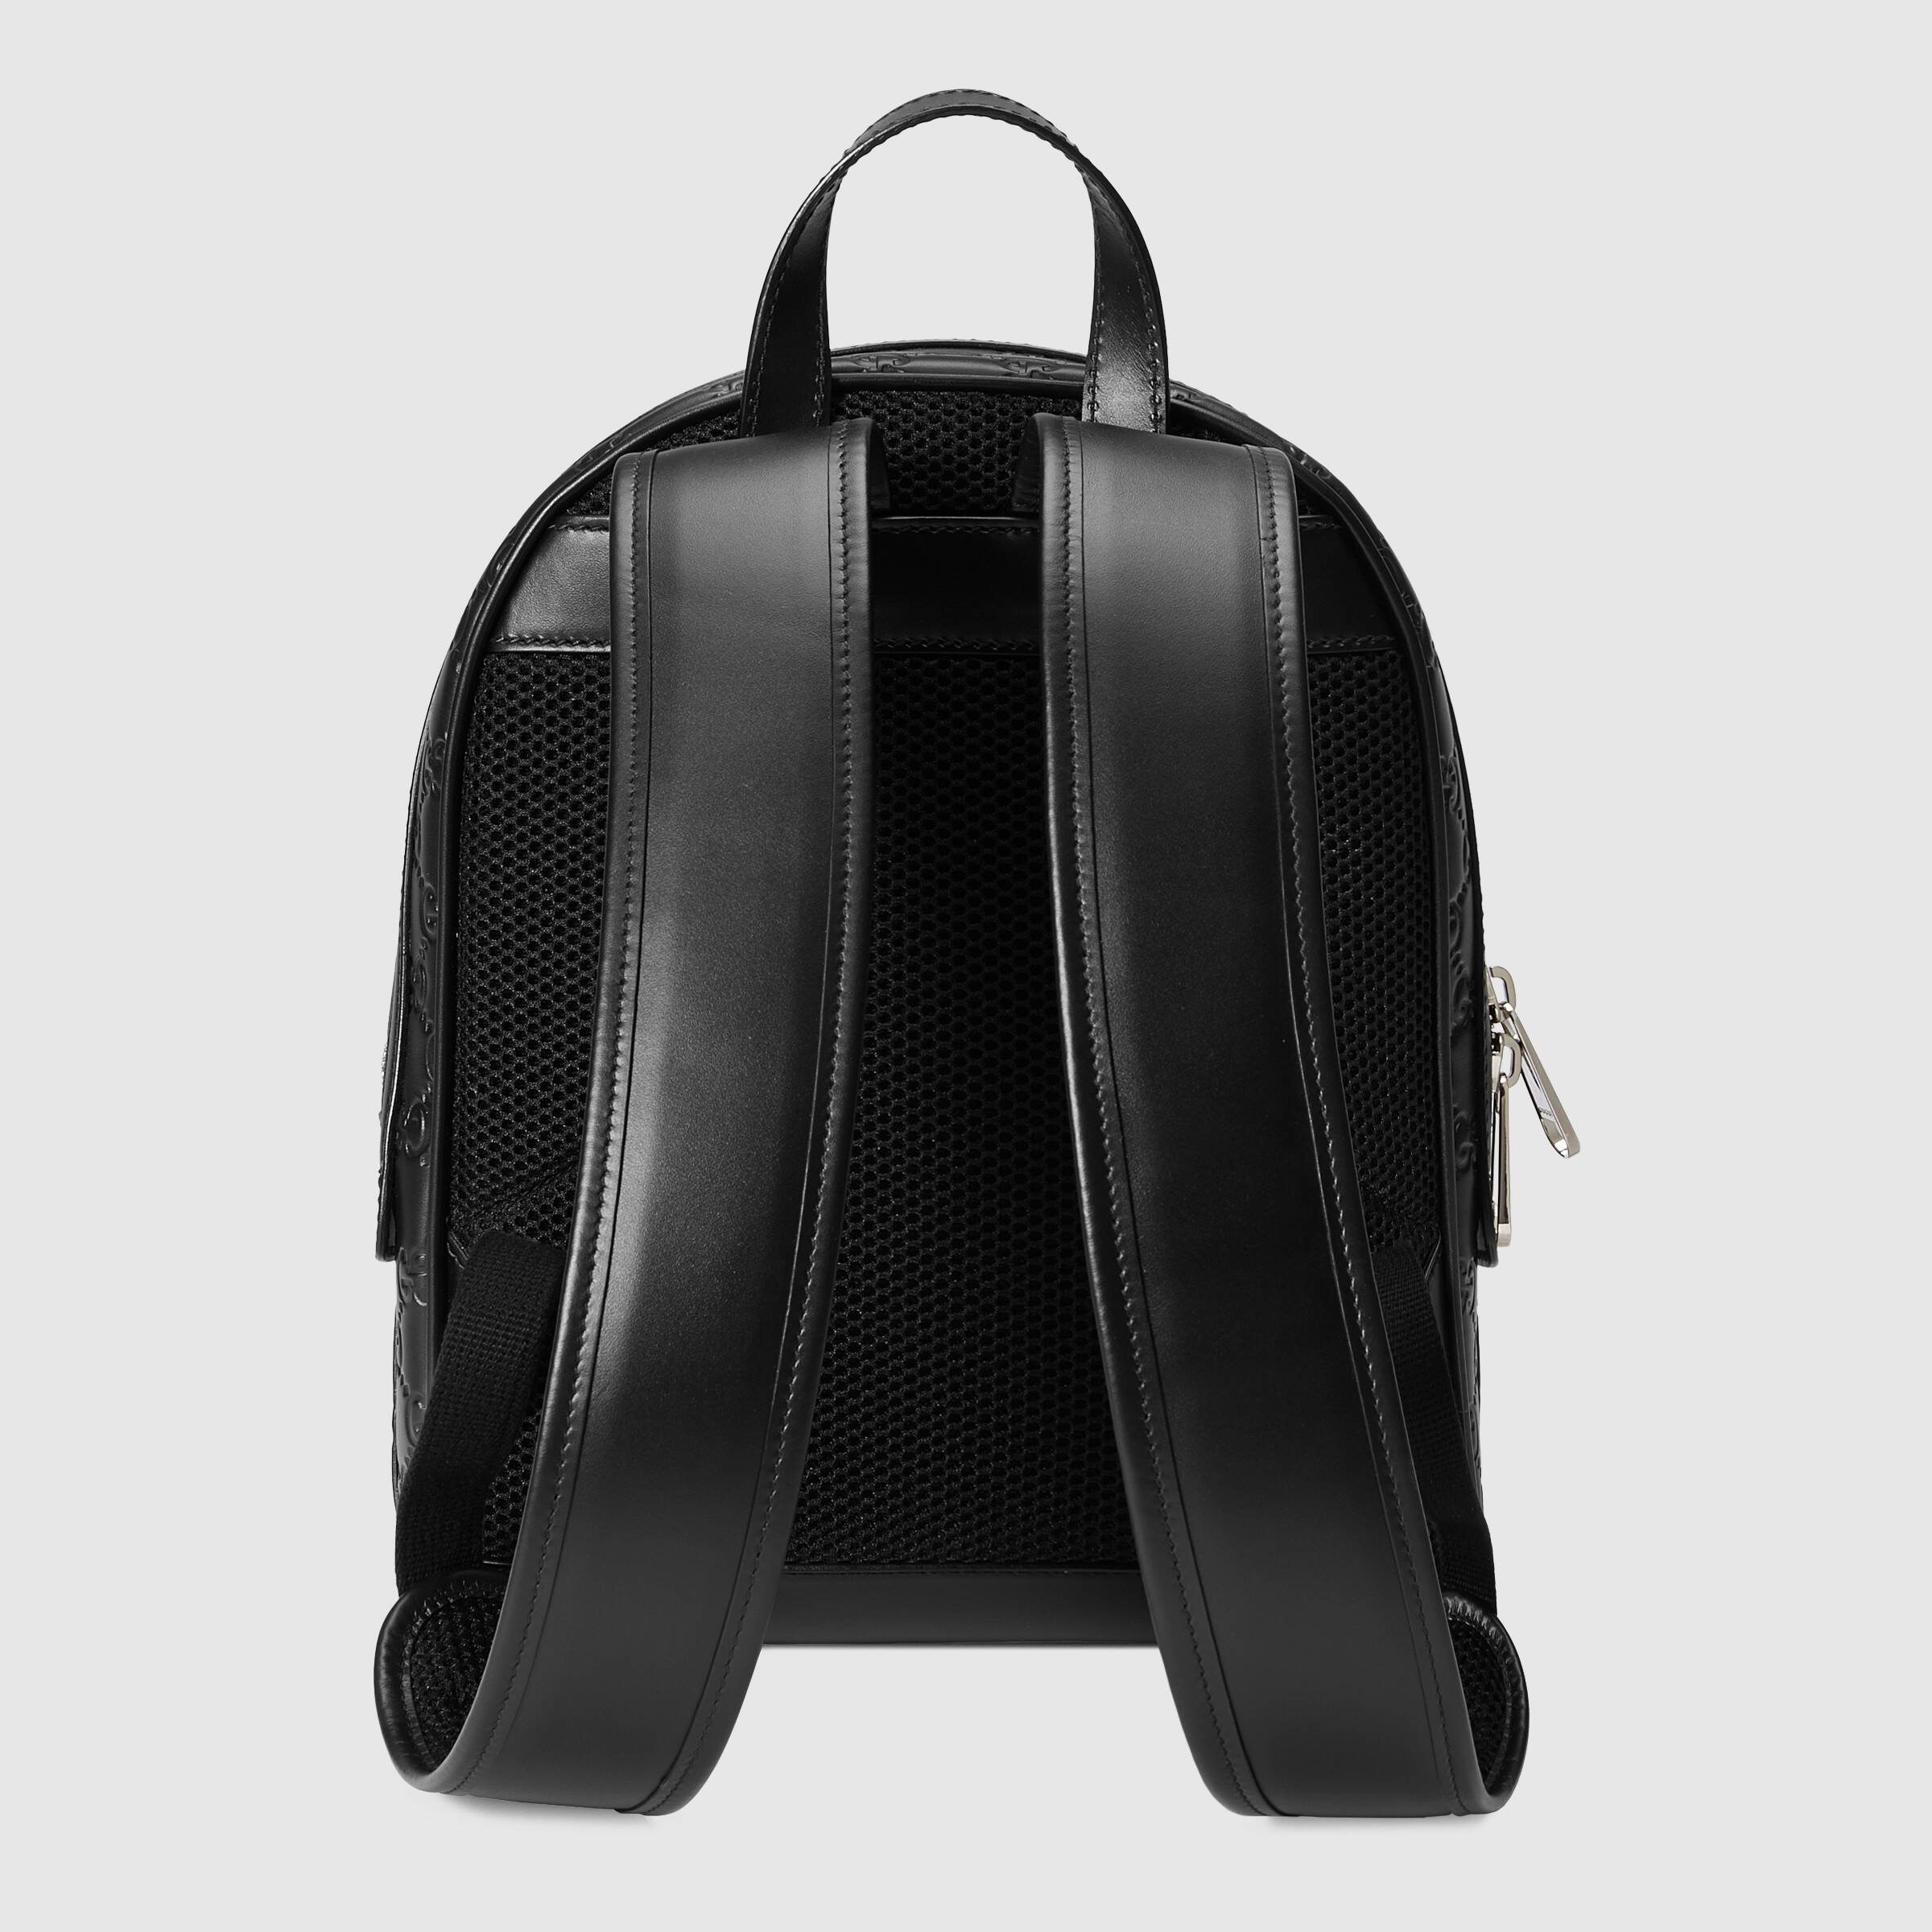 Gucci Signature Leather Backpack Black